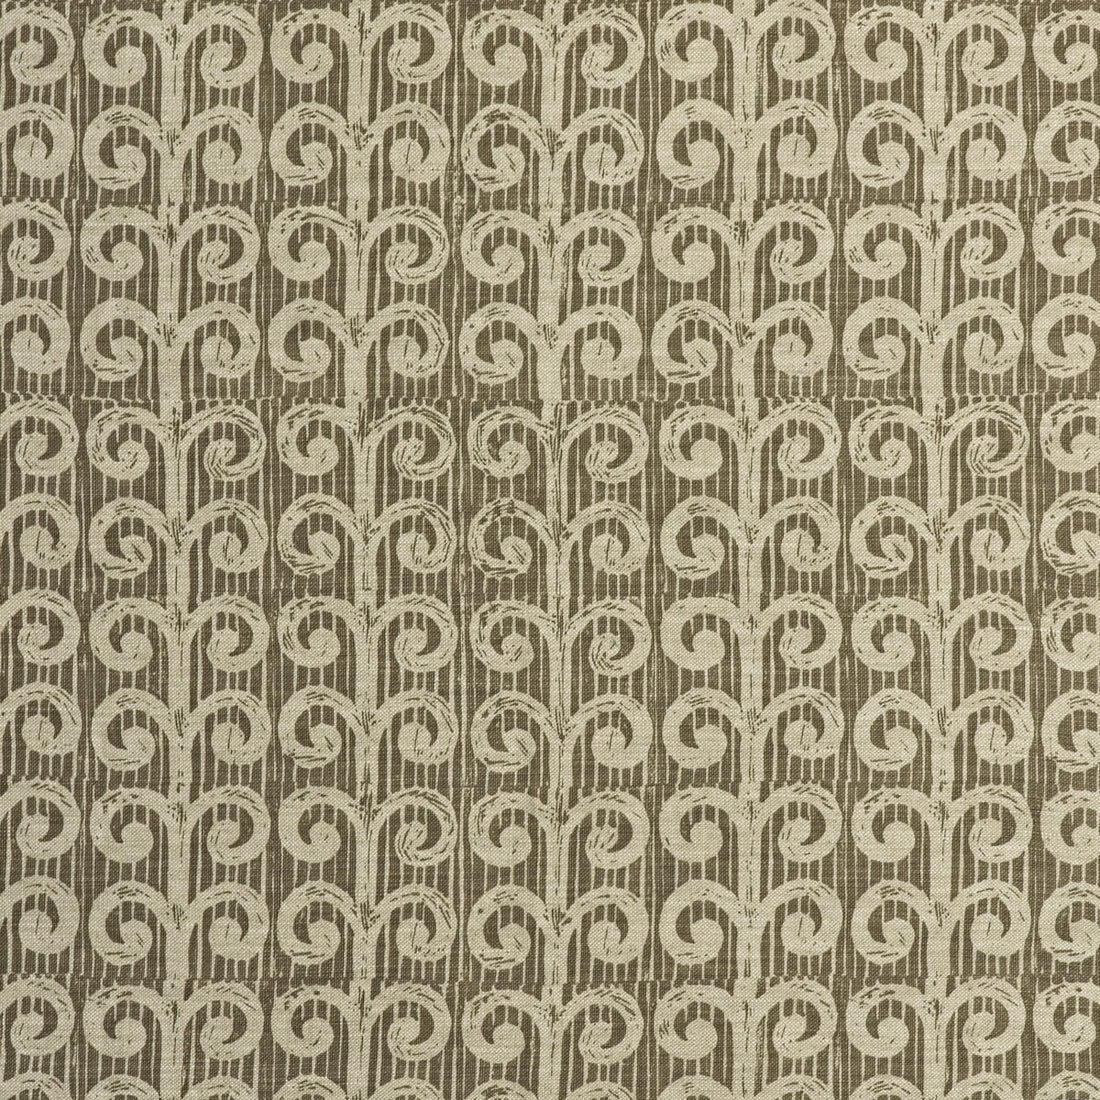 Fern fabric in stone color - pattern BFC-3673.166.0 - by Lee Jofa in the Blithfield collection